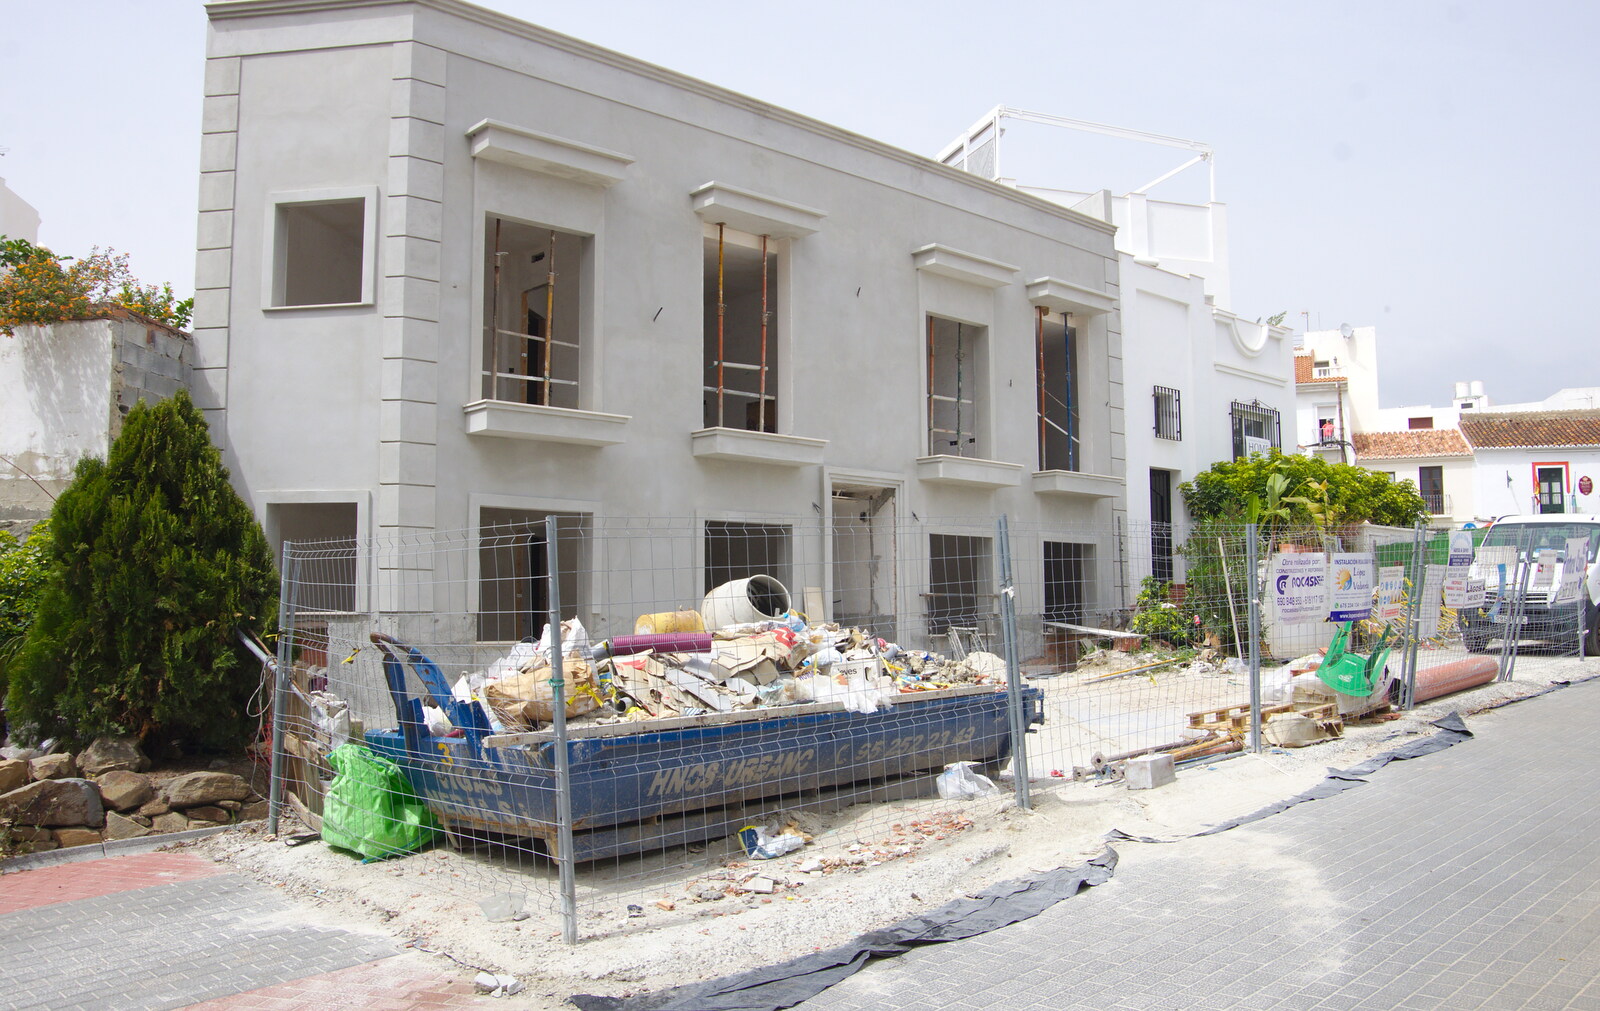 Building works near the museum from Torrecilla Beach and the Nerja Museum, Andalusia, Spain - 17th April 2019